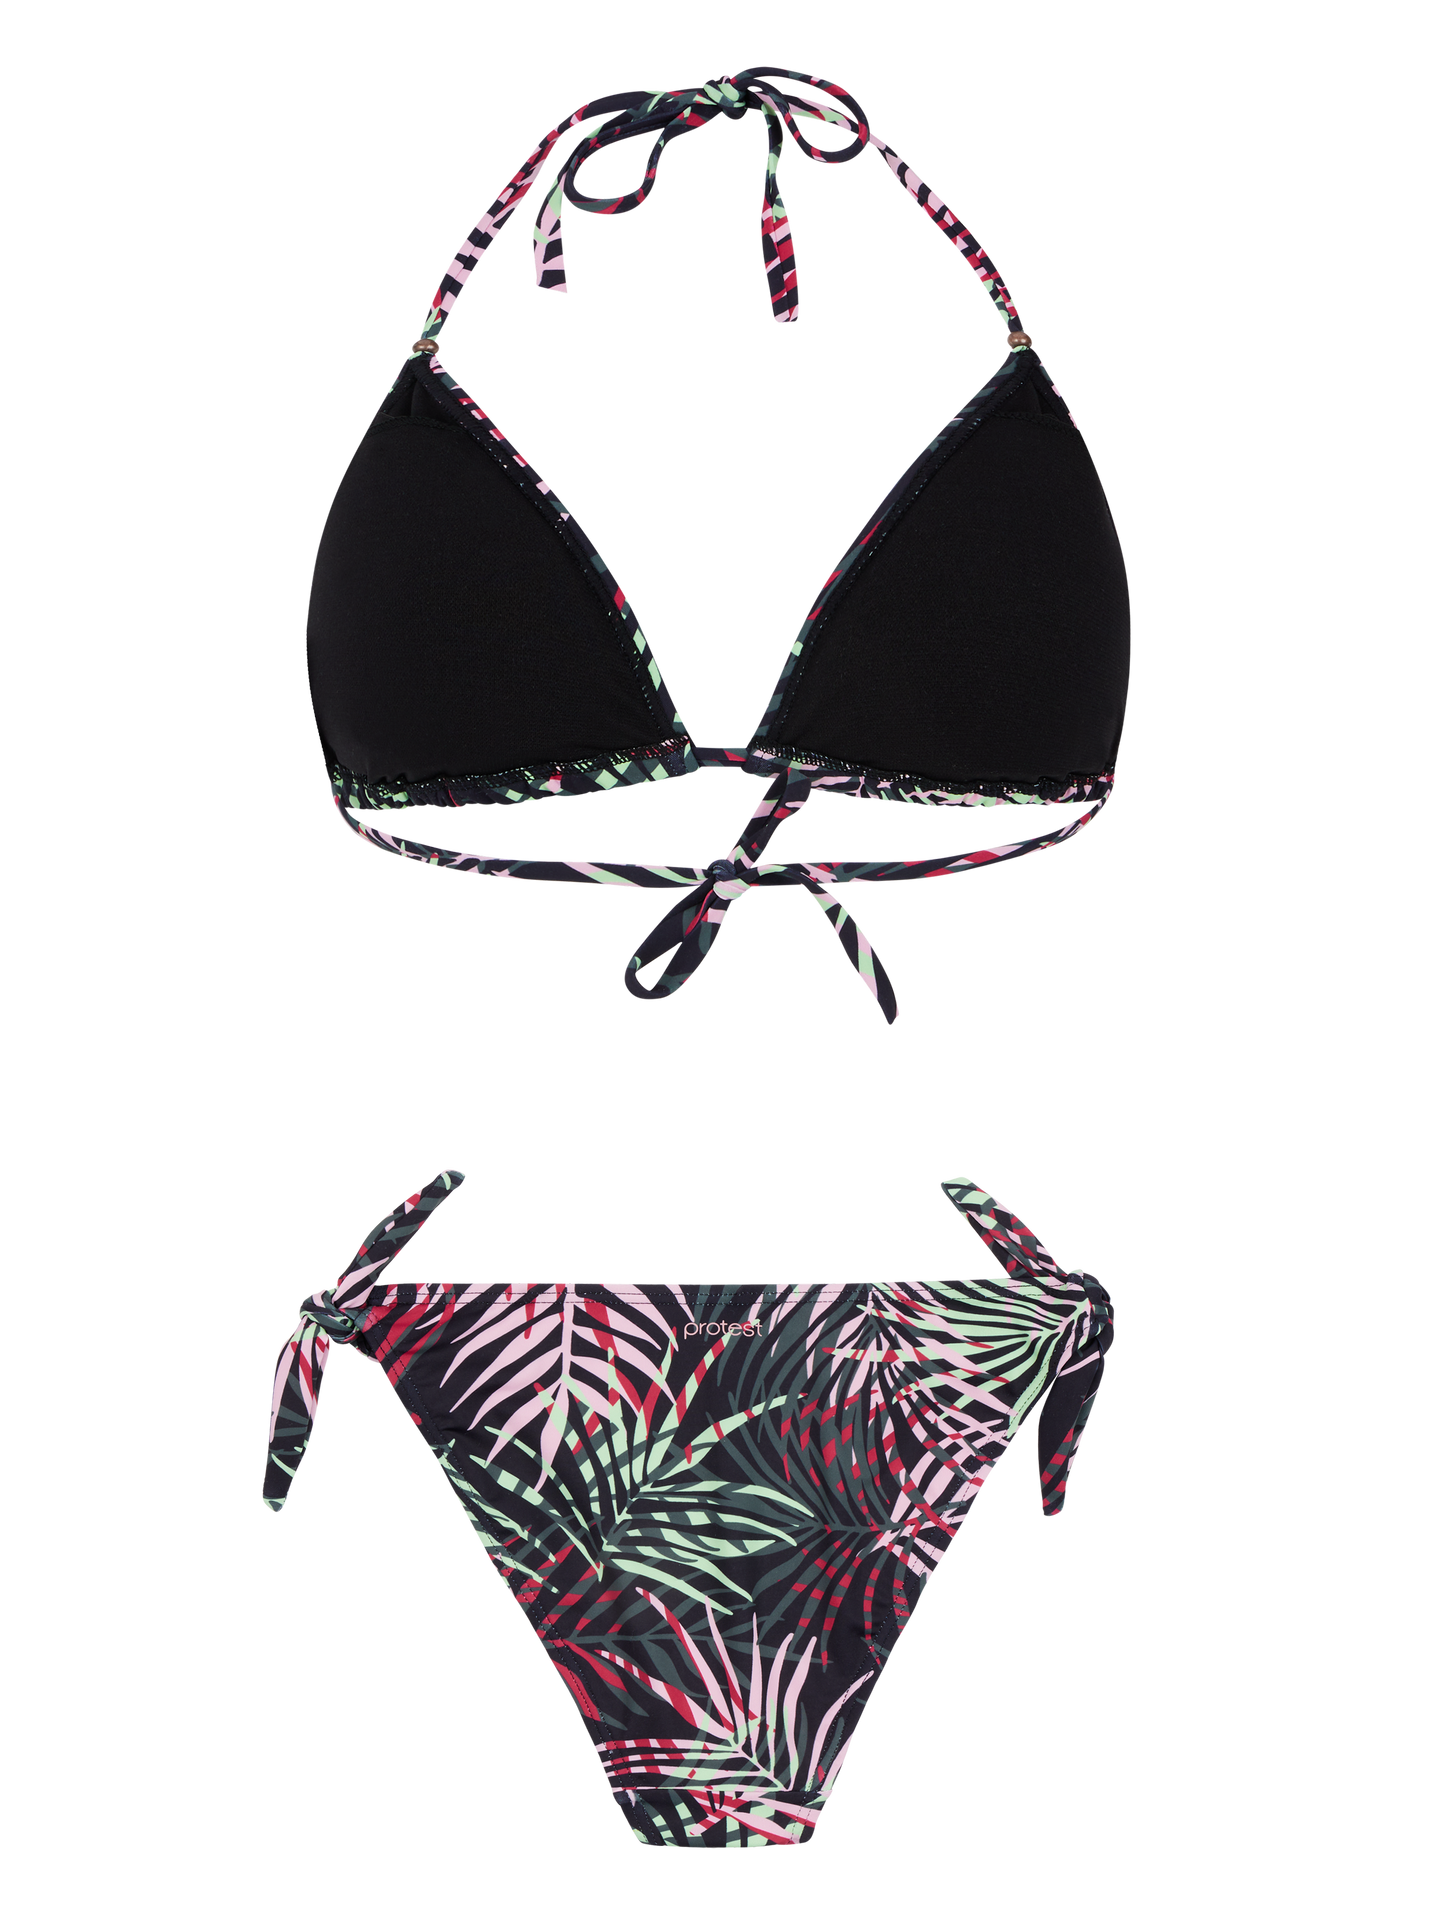 Protest Isola Bikini in Pillow Pink